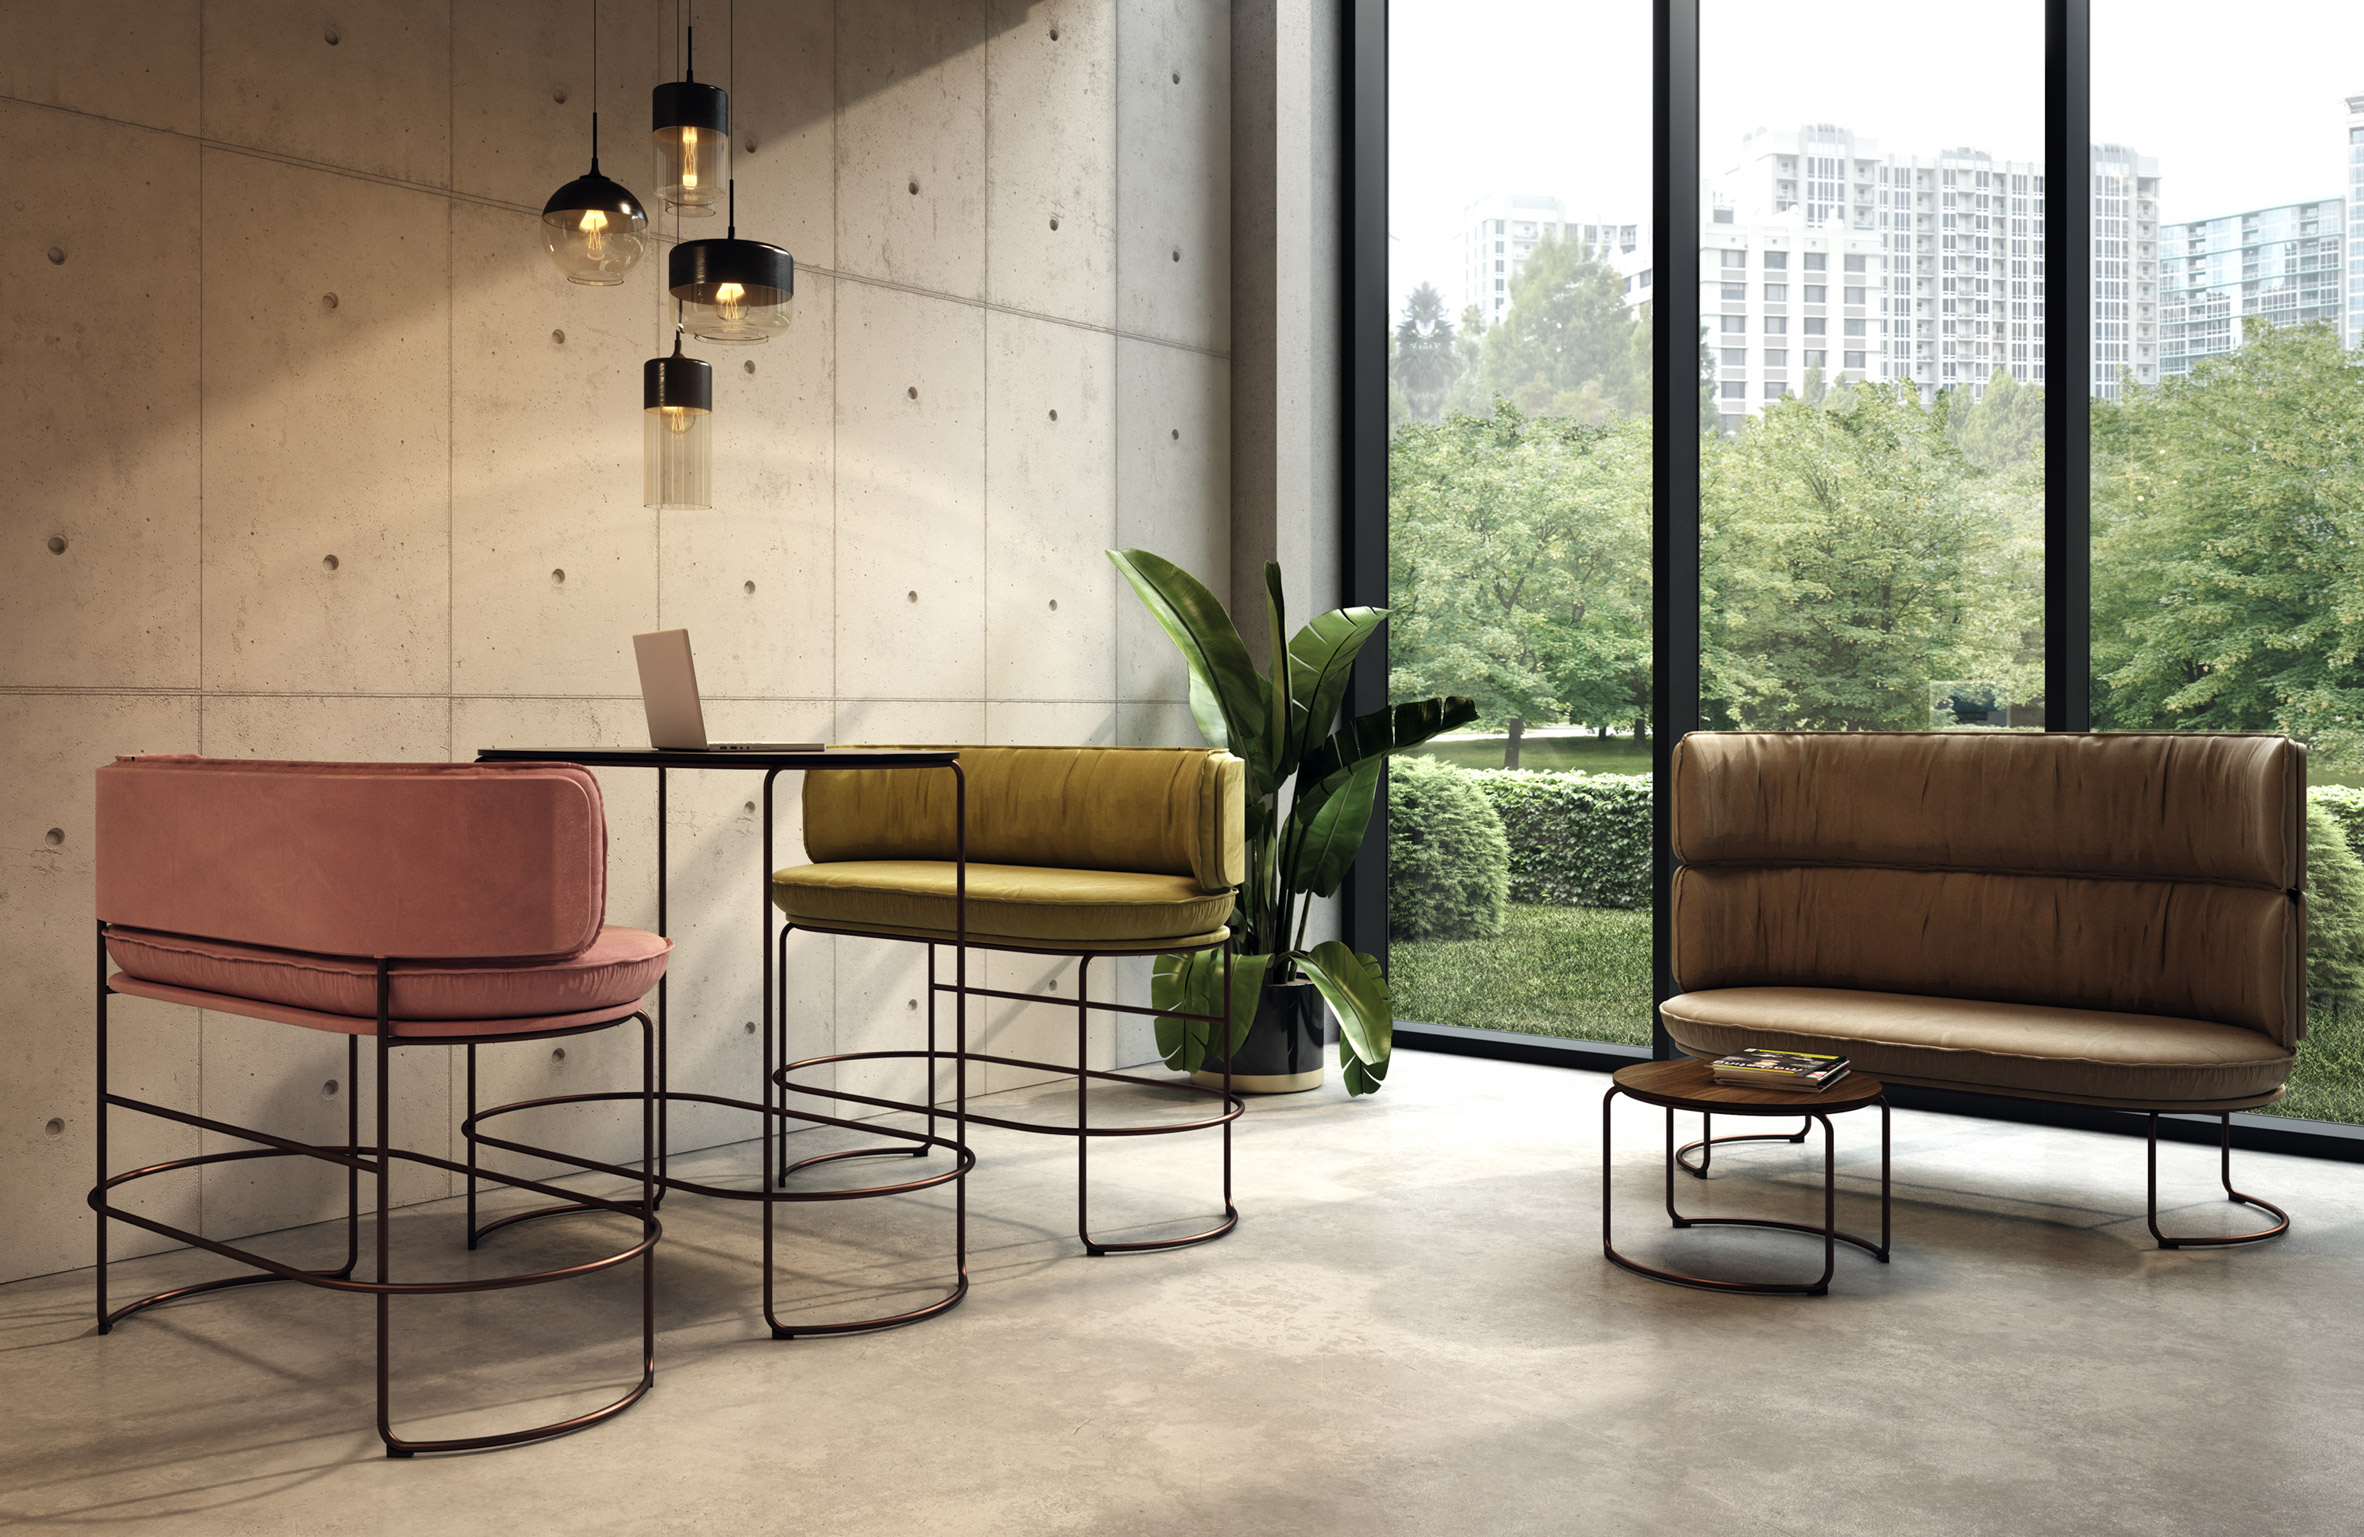 Ring sofas and tables by Vank in a meeting space